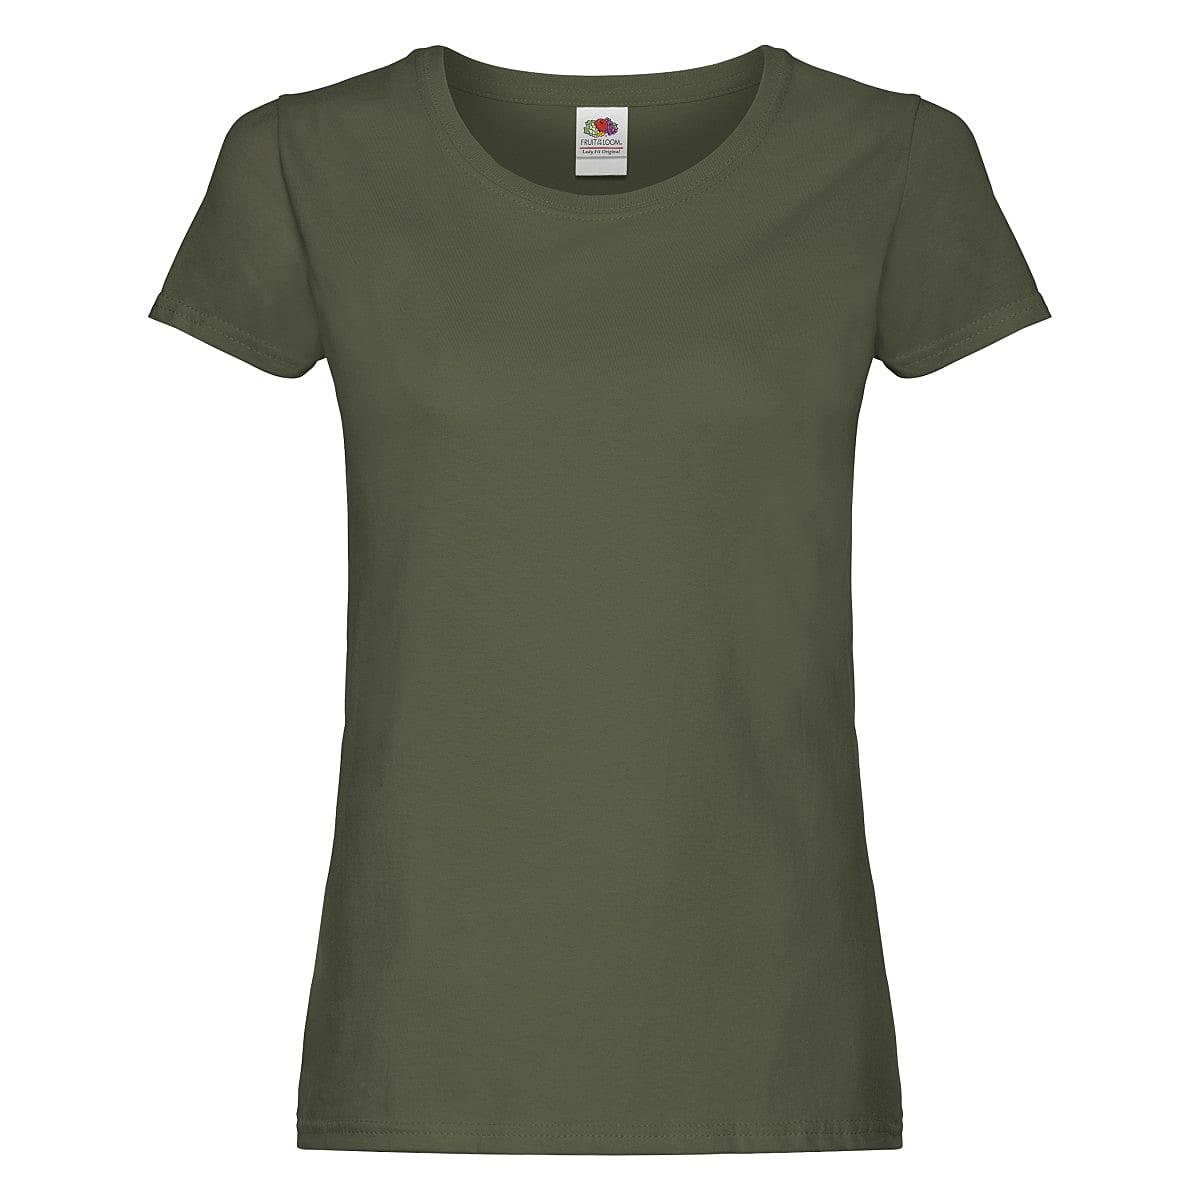 Fruit Of The Loom Lady Fit Original T-Shirt in Classic Olive (Product Code: 61420)